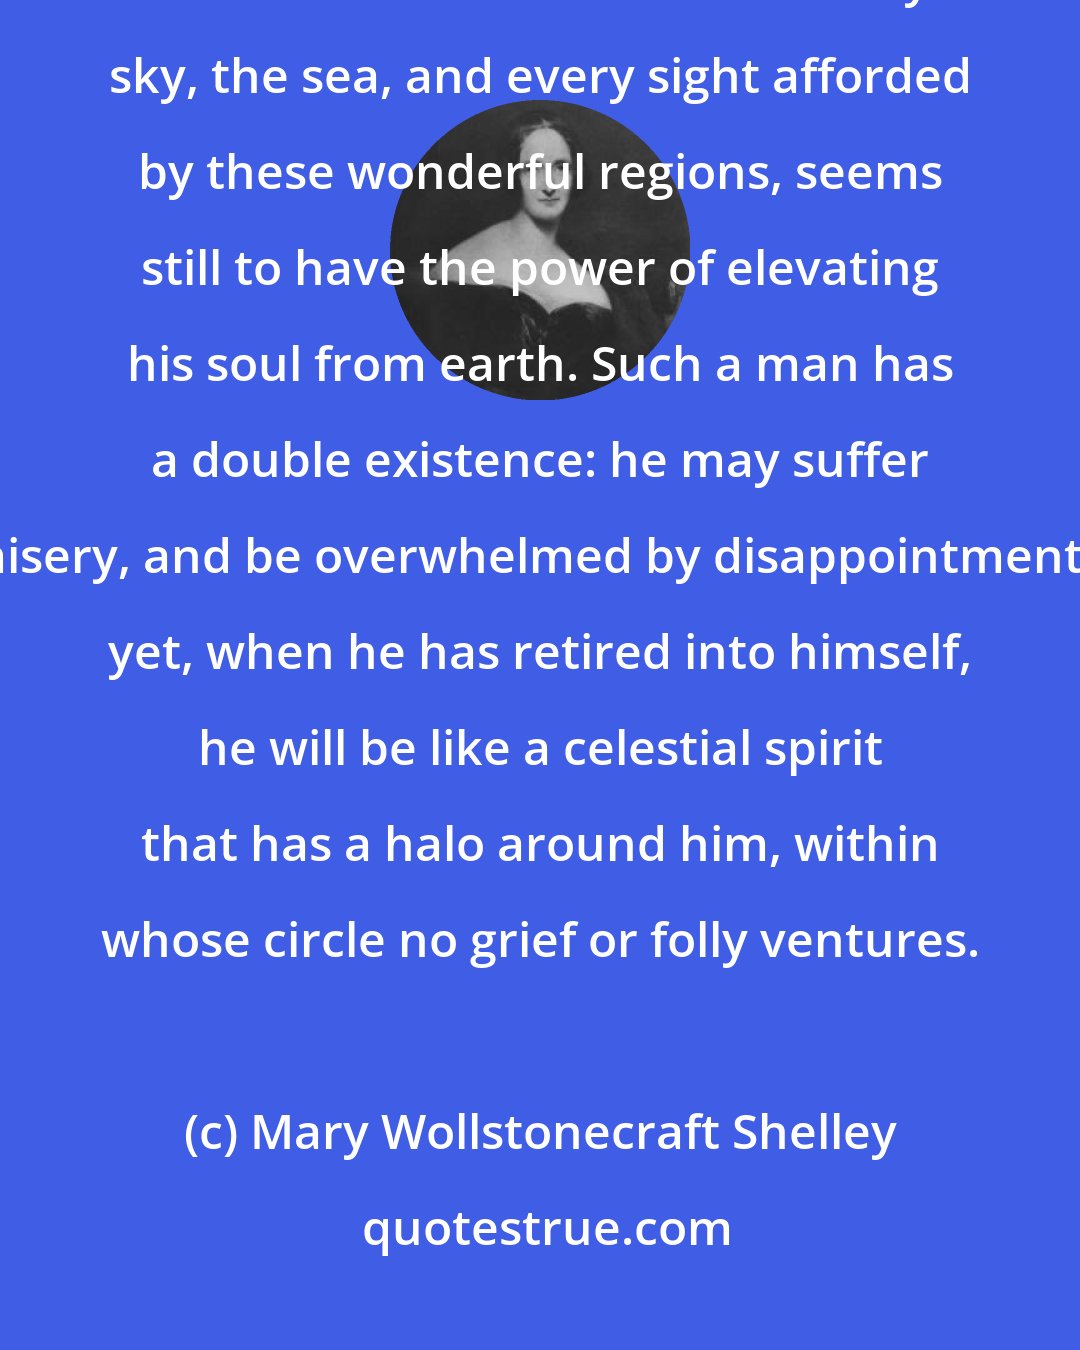 Mary Wollstonecraft Shelley: Even broken in spirit as he is, no one can feel more deeply than he does the beauties of nature. The starry sky, the sea, and every sight afforded by these wonderful regions, seems still to have the power of elevating his soul from earth. Such a man has a double existence: he may suffer misery, and be overwhelmed by disappointments; yet, when he has retired into himself, he will be like a celestial spirit that has a halo around him, within whose circle no grief or folly ventures.